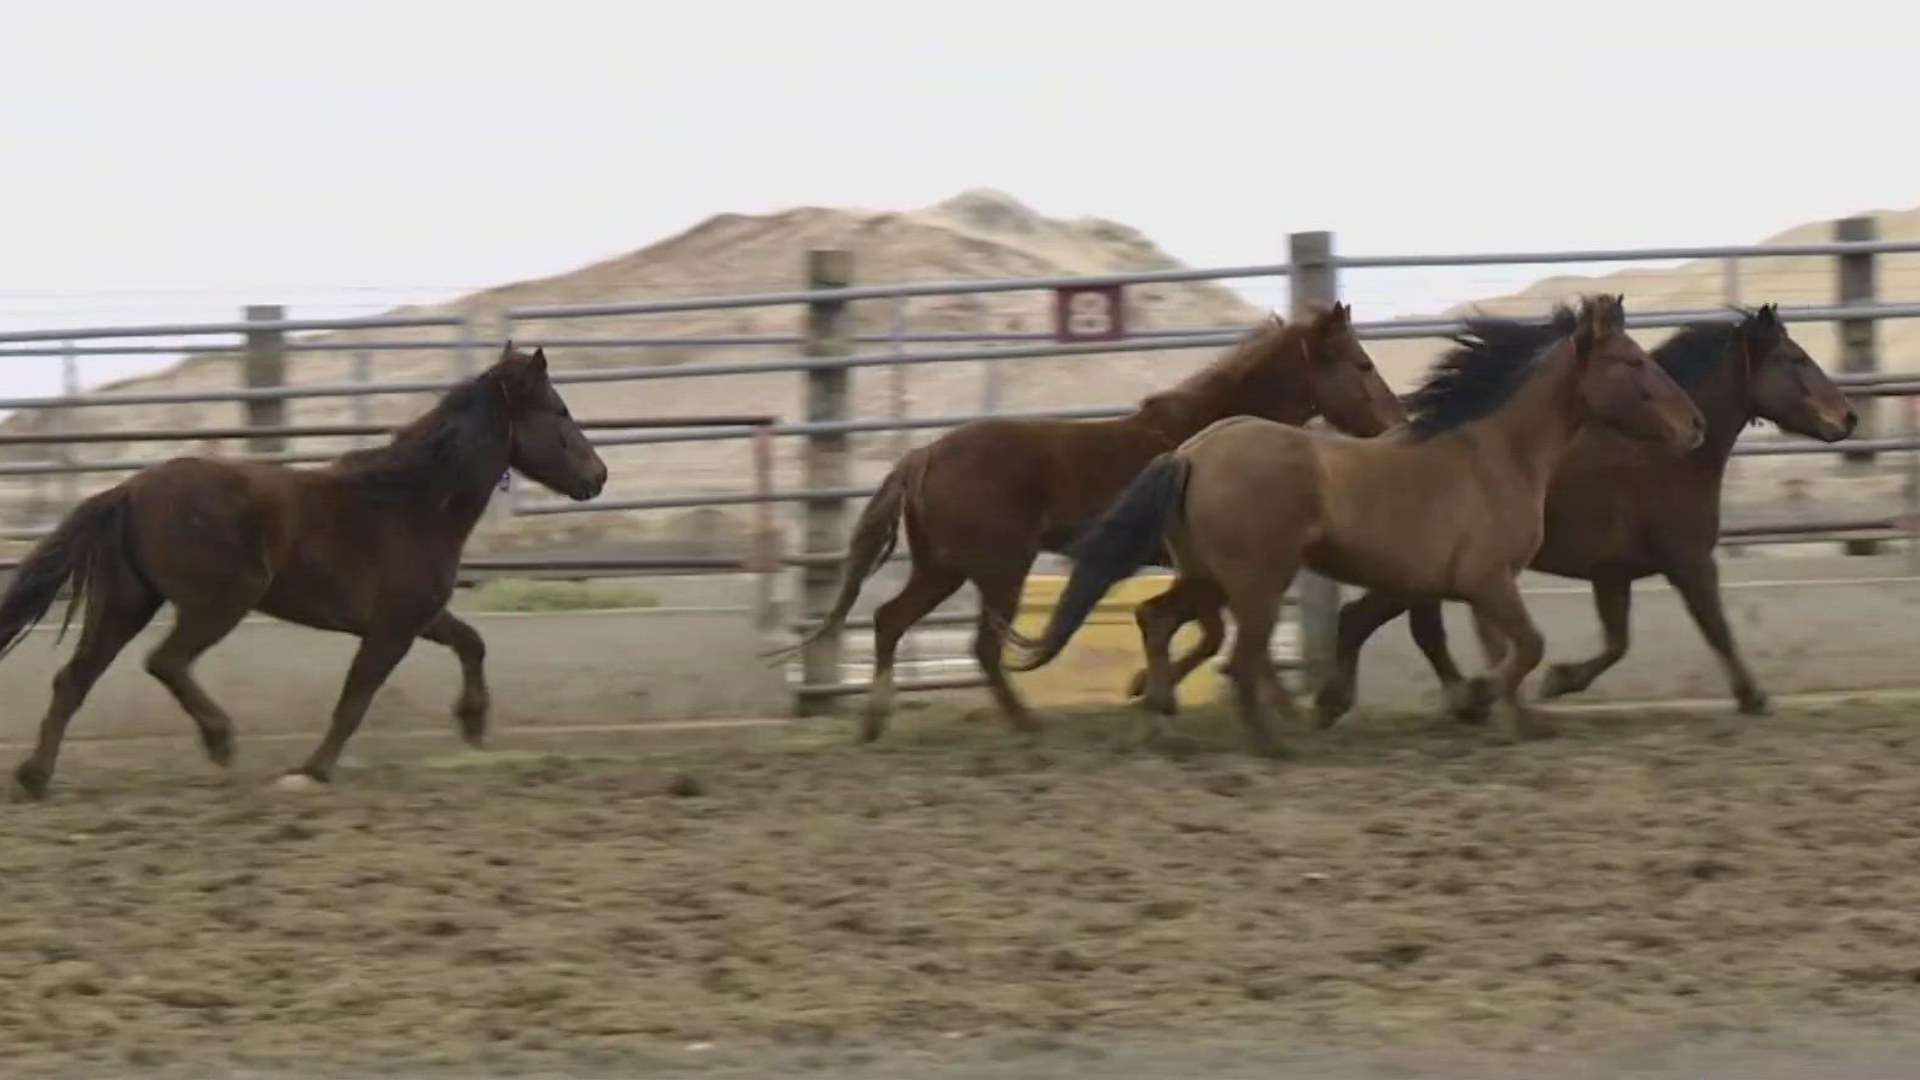 Through the Bureau of Land Management program, roughly 170 wild horses and burros have been adopted by more than 120 trainers for the Mustang Mania event.